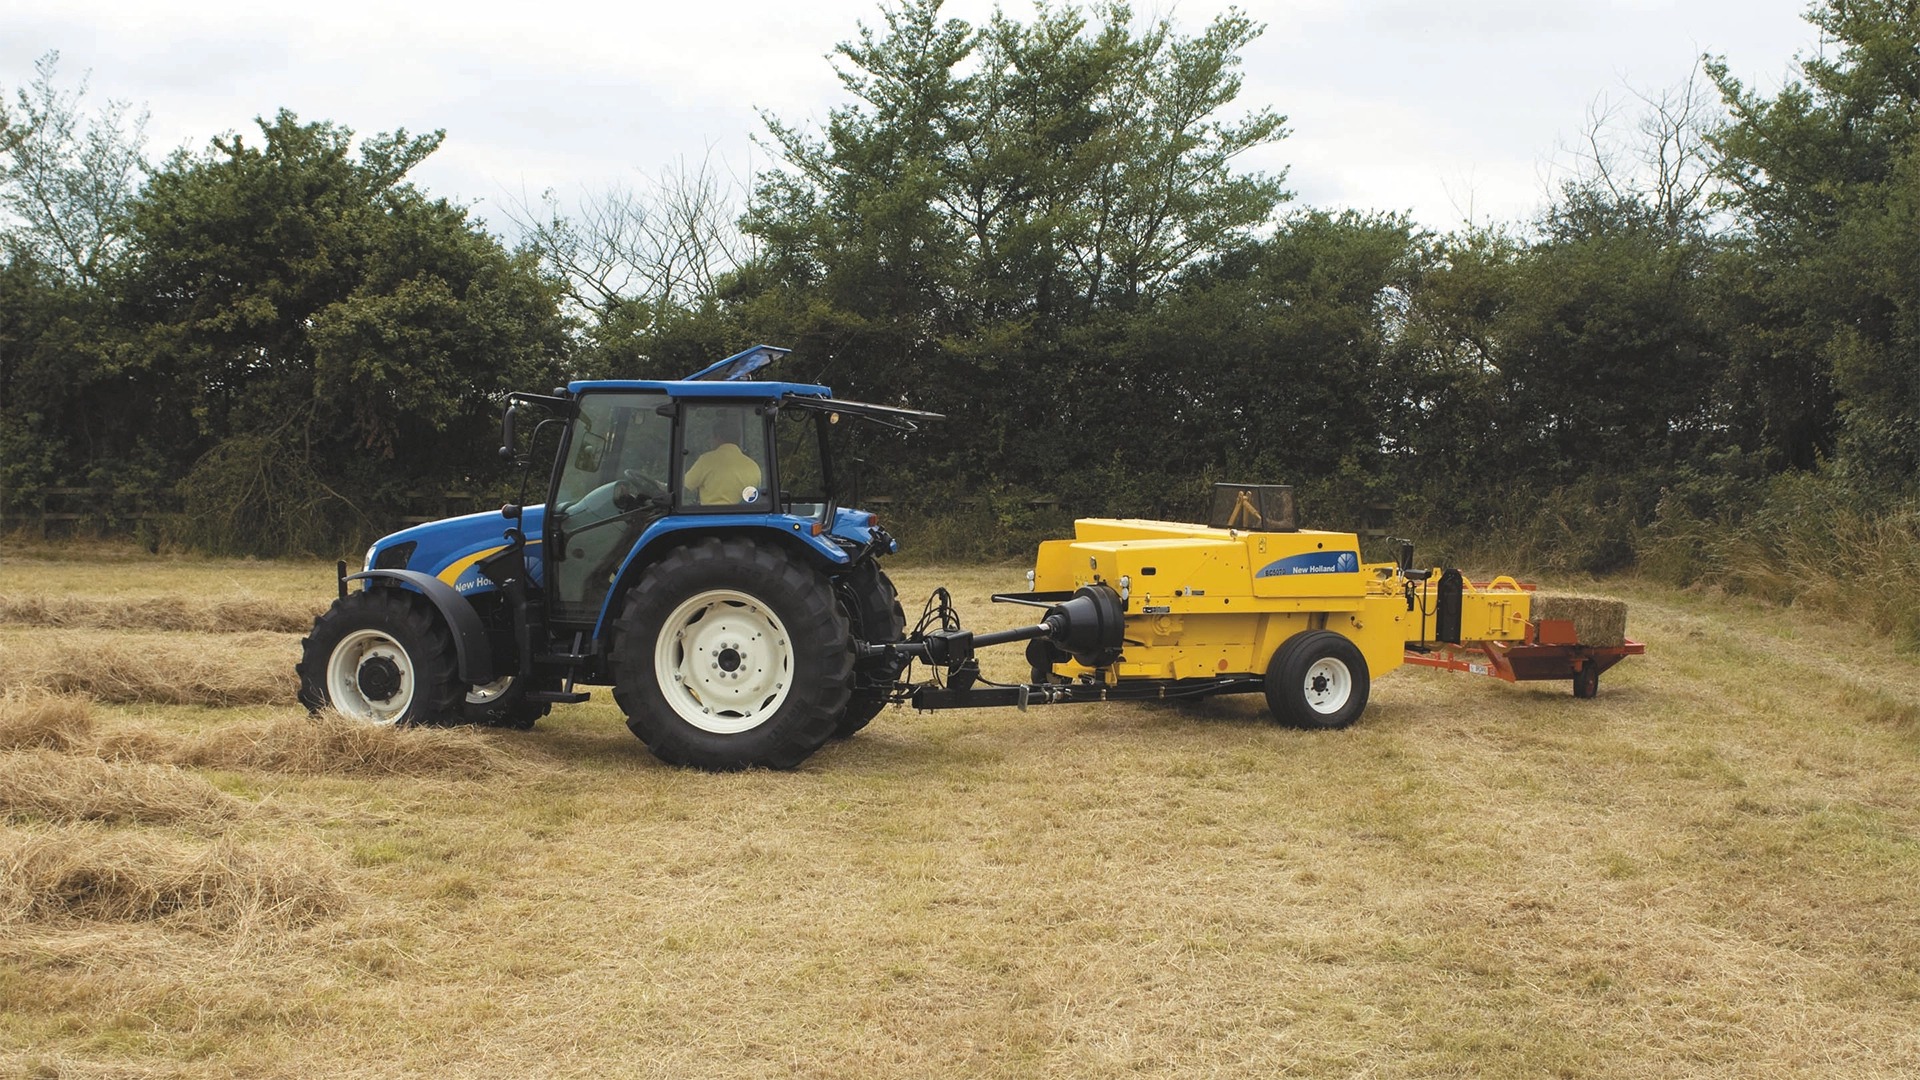 New Holland tractor towing a BC5000 baler through a hay field.